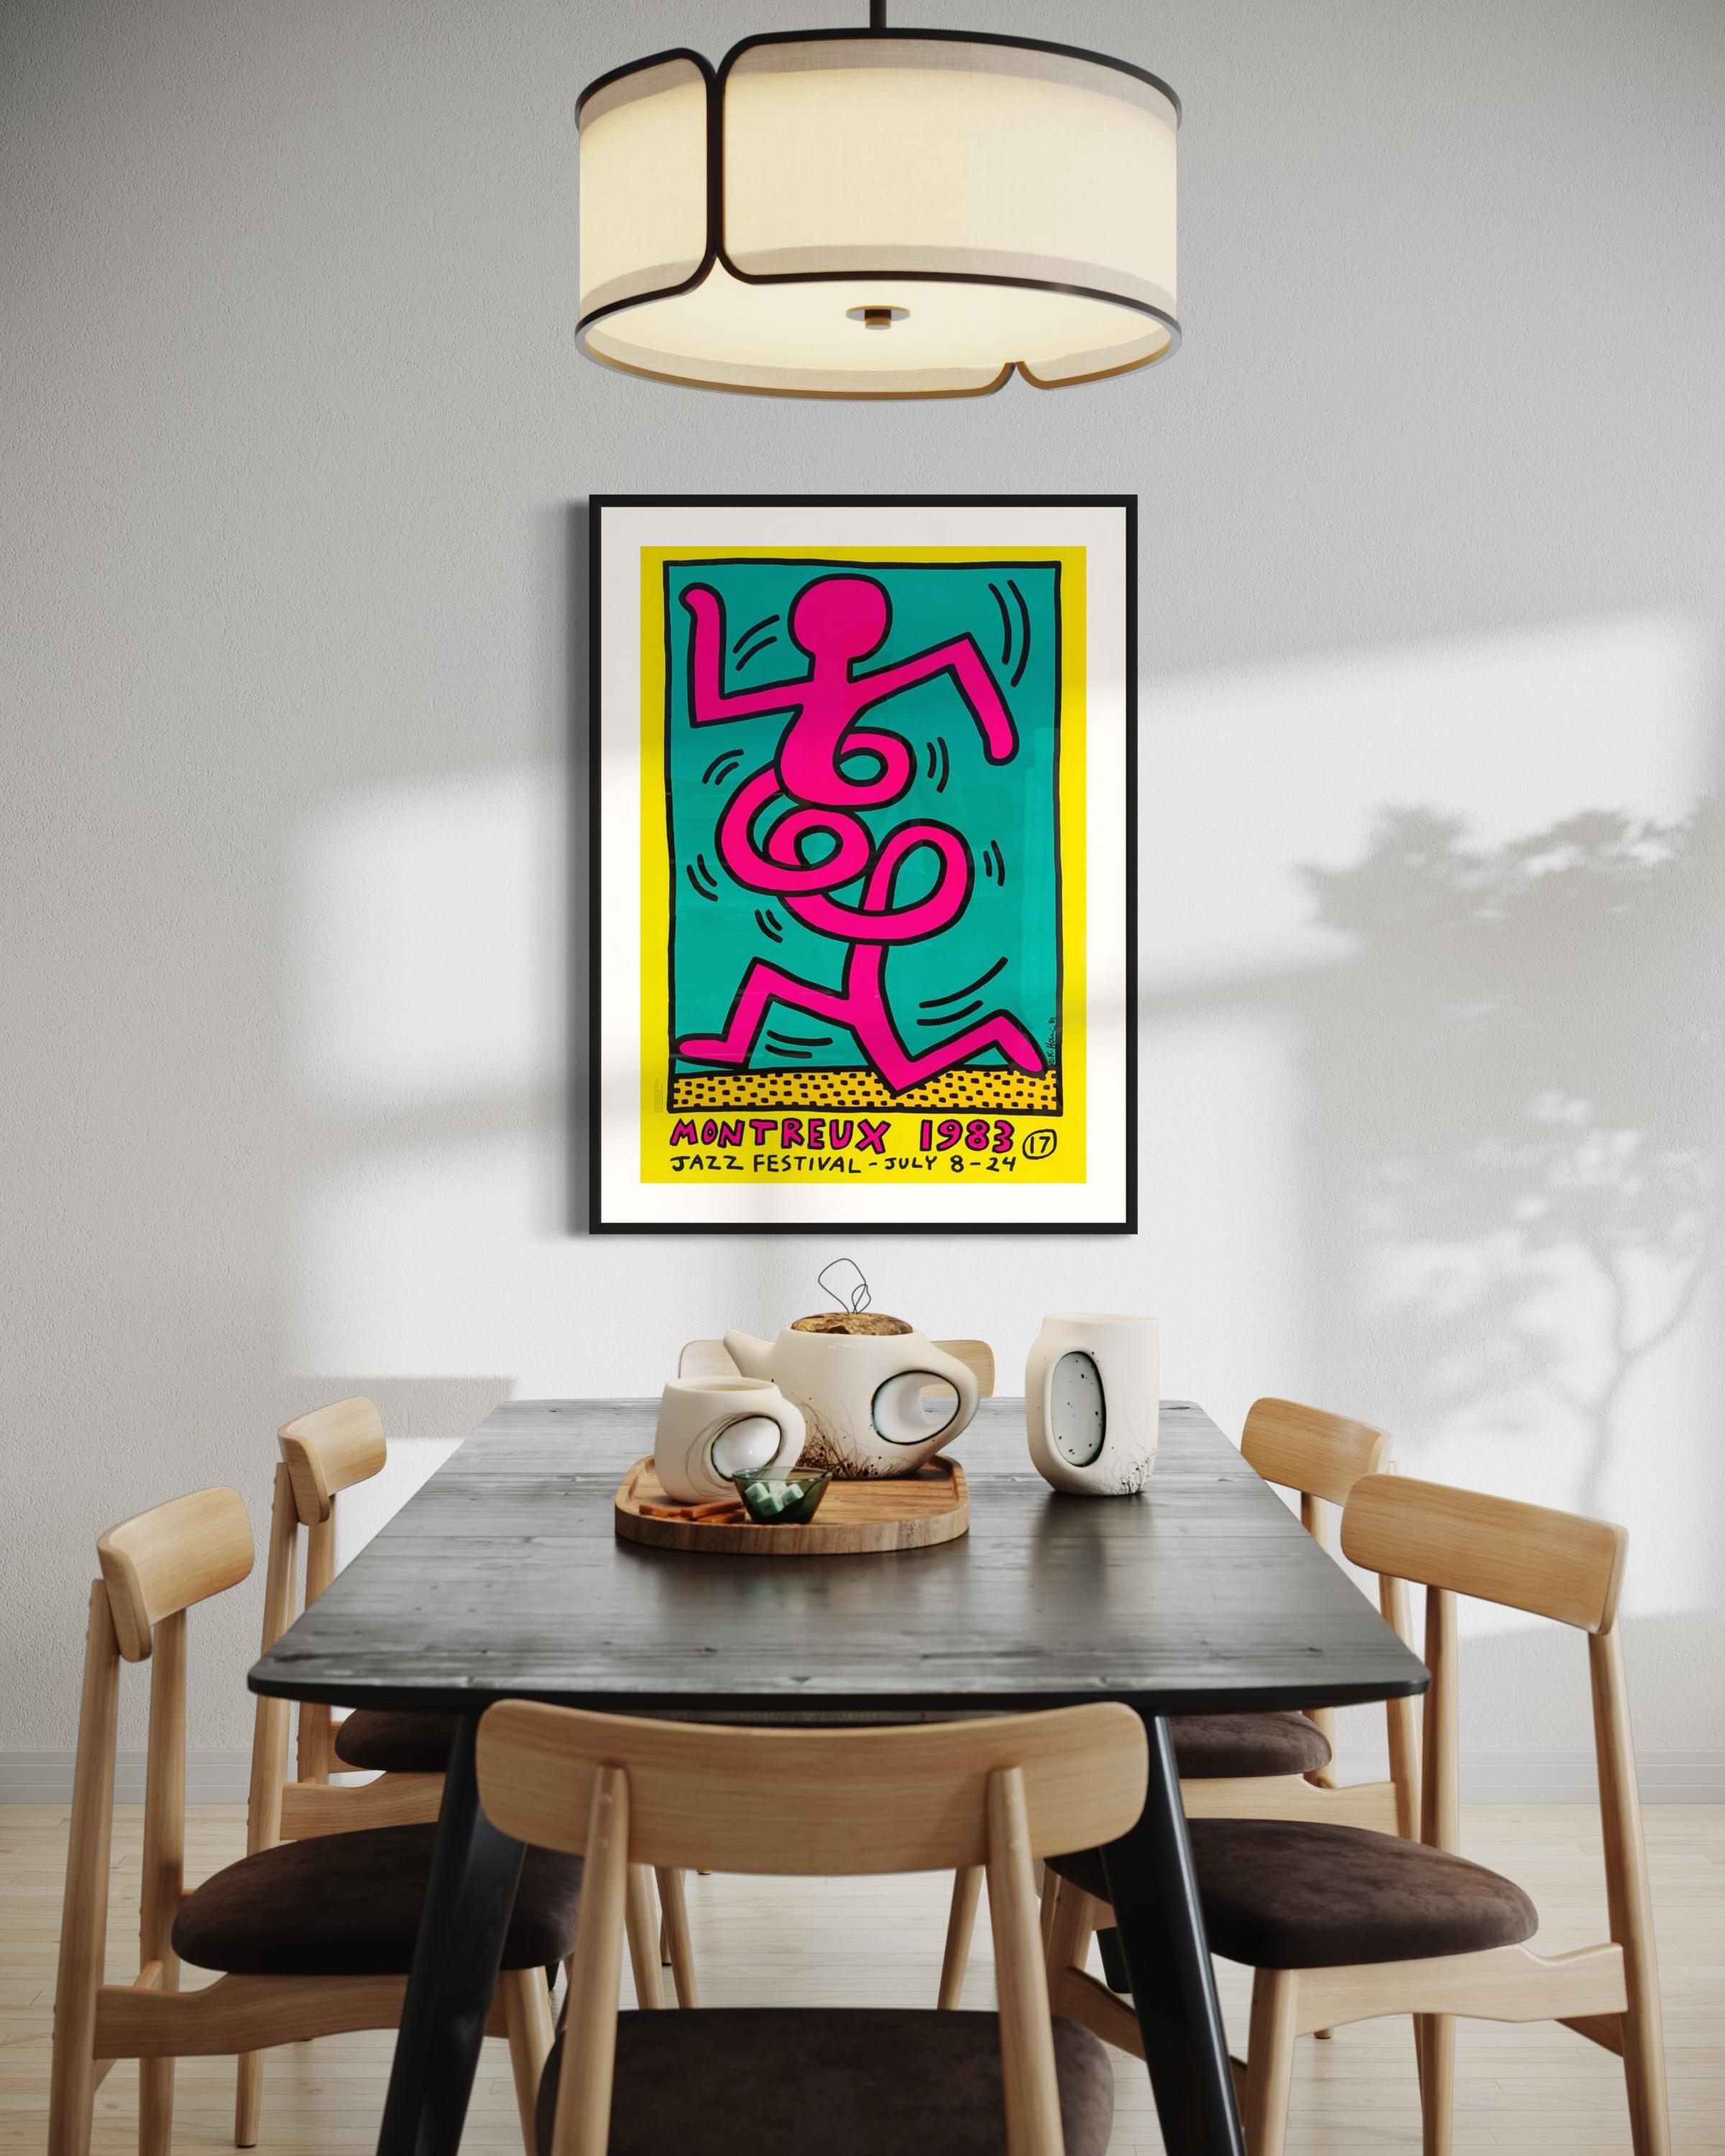 Montreux Jazz Festival 1983 (Yellow) - Street Art Print by Keith Haring